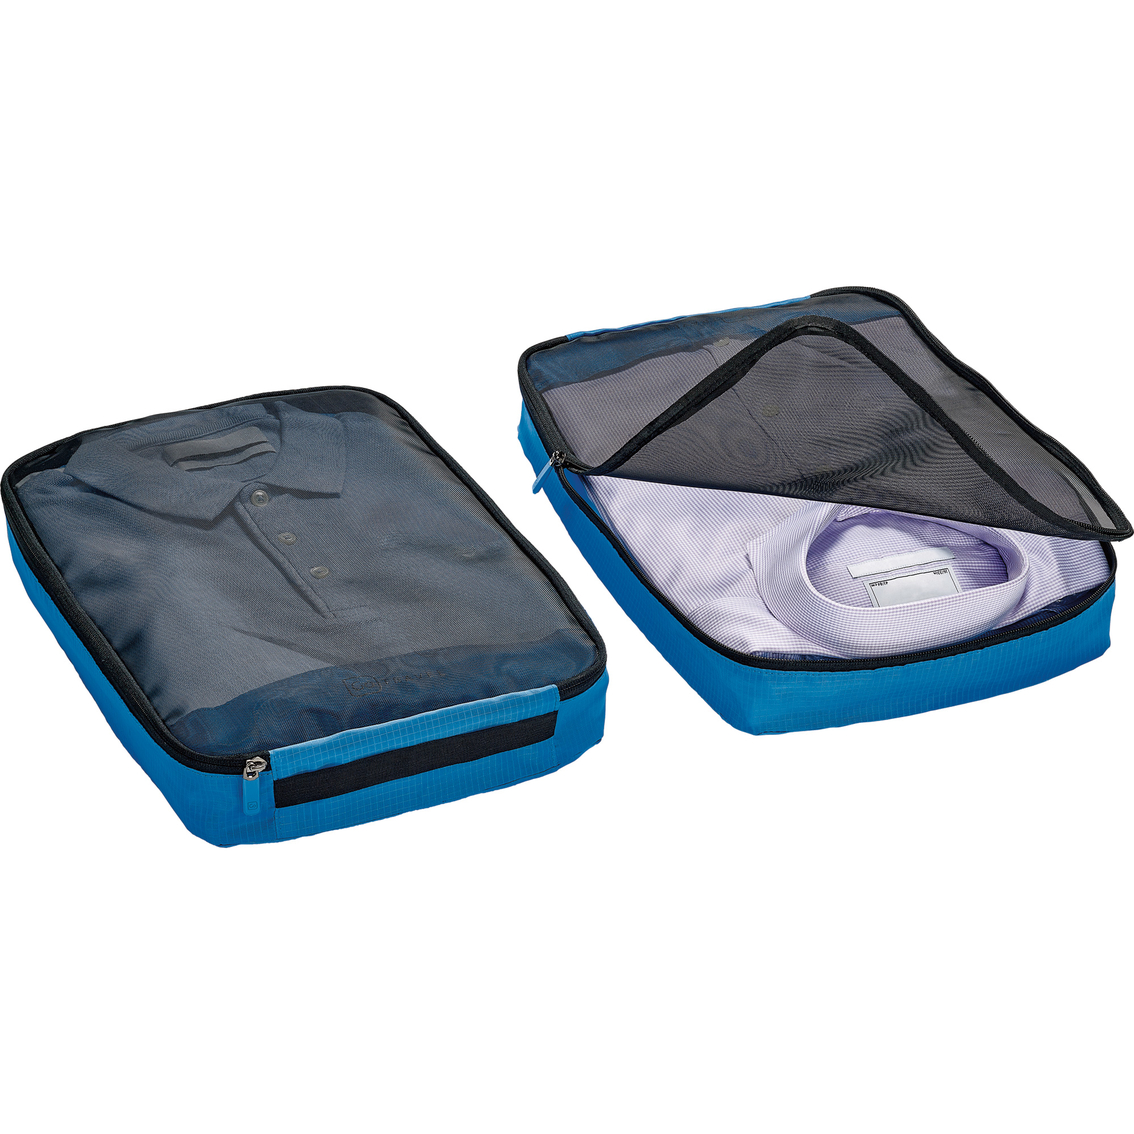 Go Travel Packing Cubes 2 pk. - Image 2 of 2